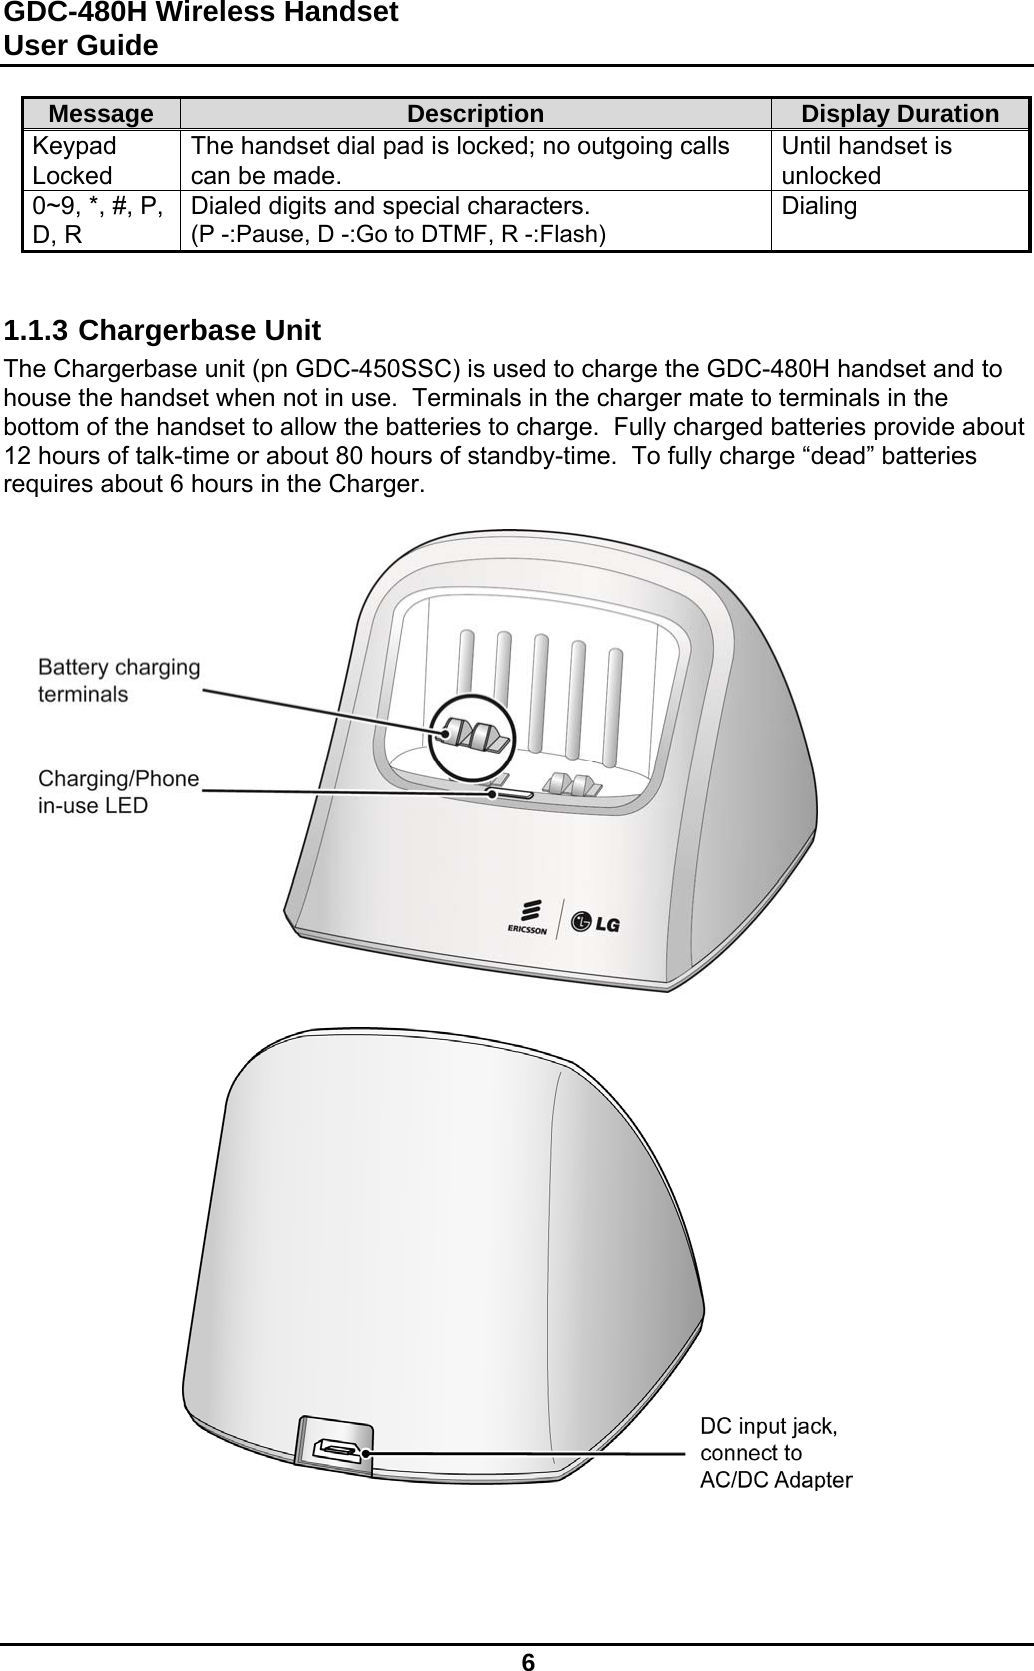 GDC-480H Wireless Handset User Guide   6  Message  Description  Display Duration Keypad Locked The handset dial pad is locked; no outgoing calls can be made. Until handset is unlocked 0~9, *, #, P, D, R Dialed digits and special characters. (P -:Pause, D -:Go to DTMF, R -:Flash) Dialing   1.1.3 Chargerbase Unit The Chargerbase unit (pn GDC-450SSC) is used to charge the GDC-480H handset and to house the handset when not in use.  Terminals in the charger mate to terminals in the bottom of the handset to allow the batteries to charge.  Fully charged batteries provide about 12 hours of talk-time or about 80 hours of standby-time.  To fully charge “dead” batteries requires about 6 hours in the Charger.     